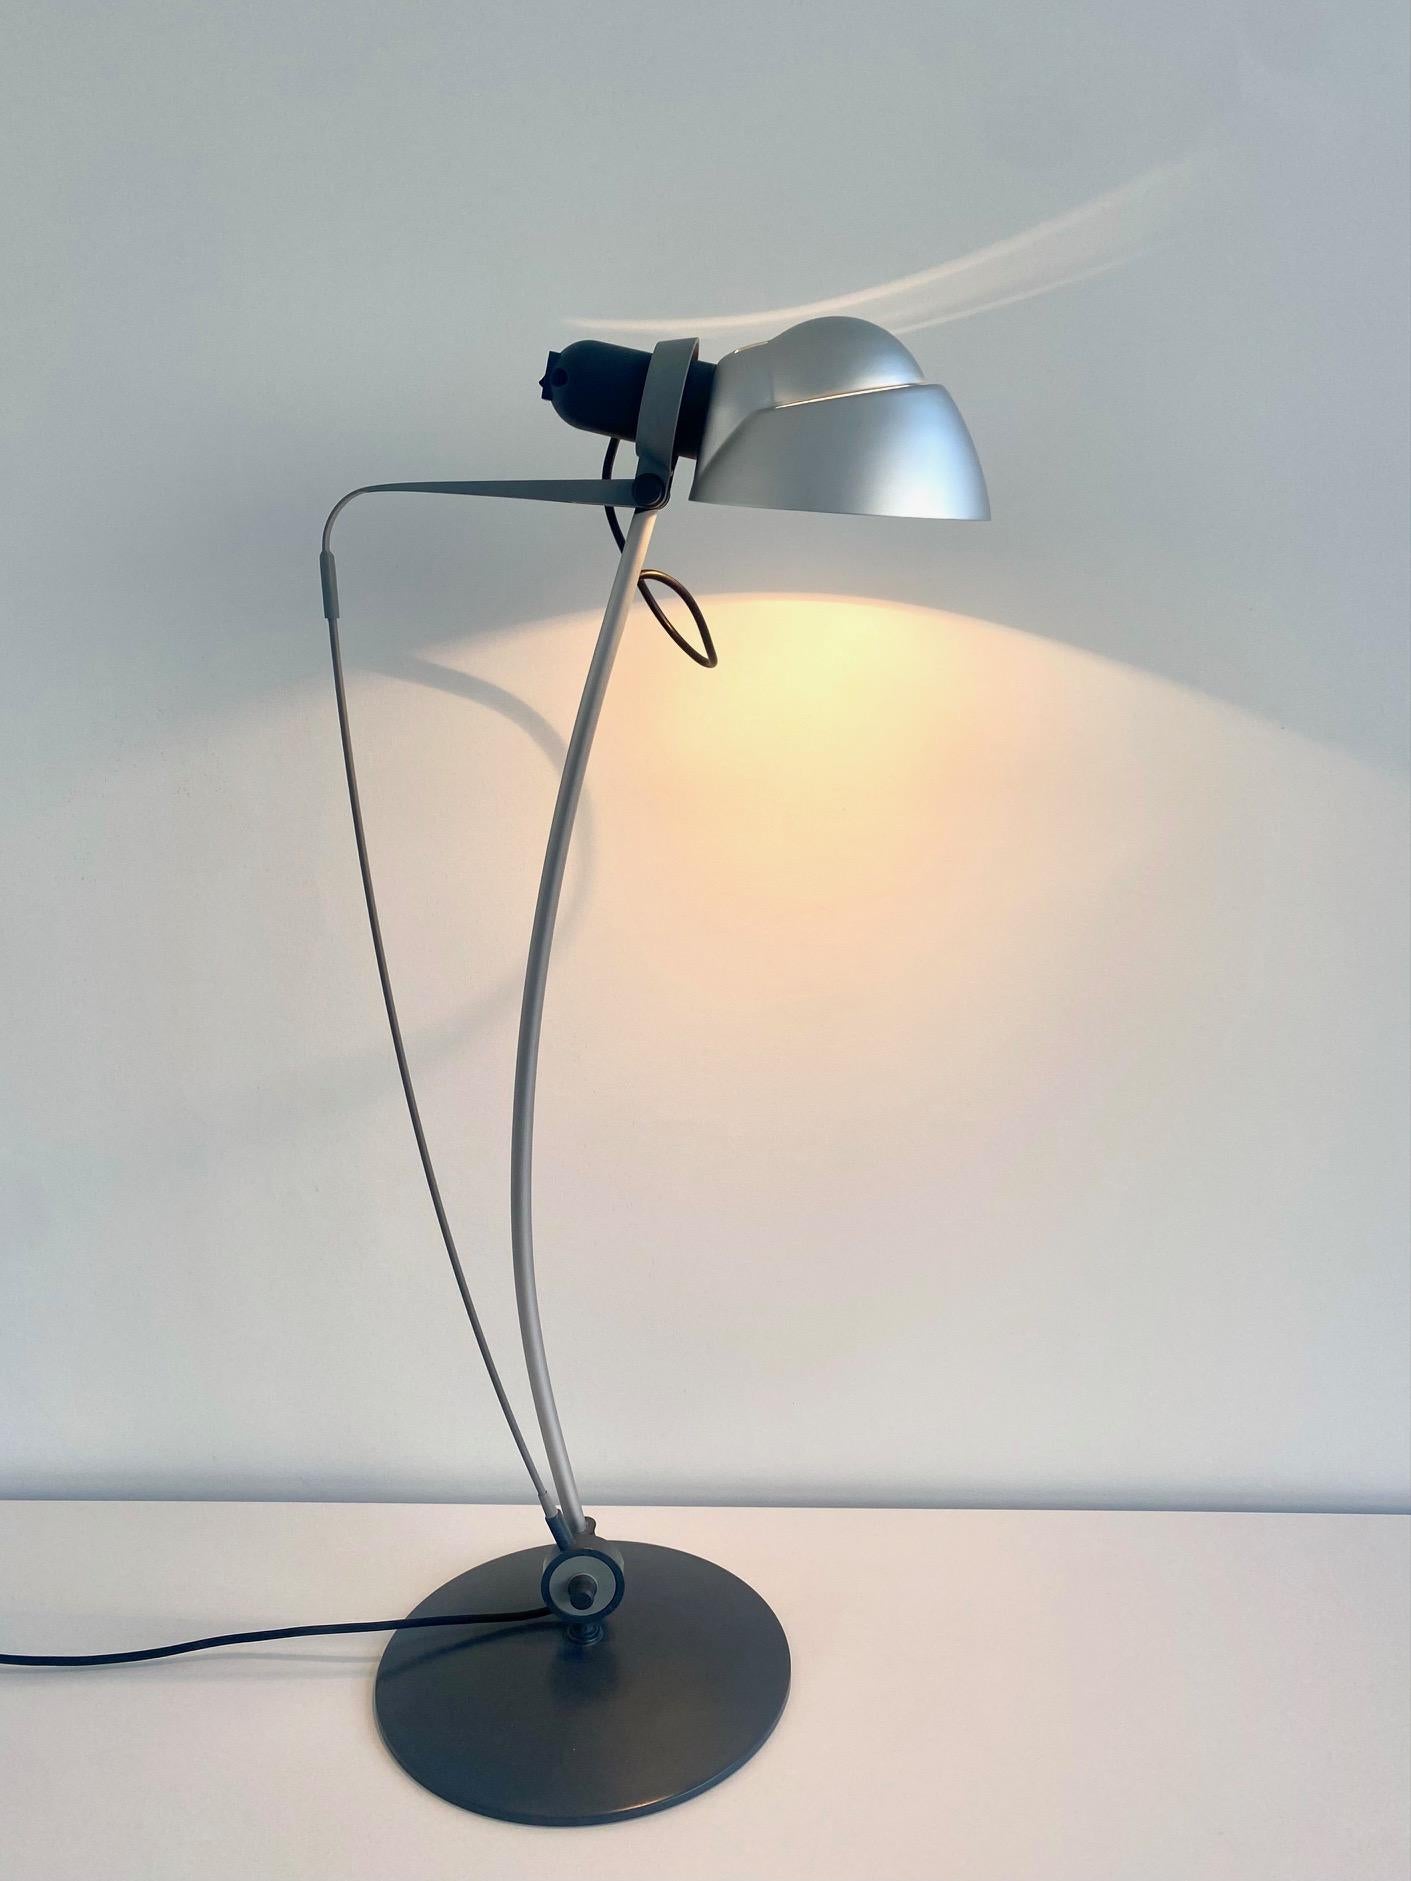 Sini desk lamp by Rene Kemna For Sirrah, Italy, 1980s.

The tension of the form of this desk lamp is beautiful. The bow keeps the lamp in the right position.

The lamp is in a very good working condition.